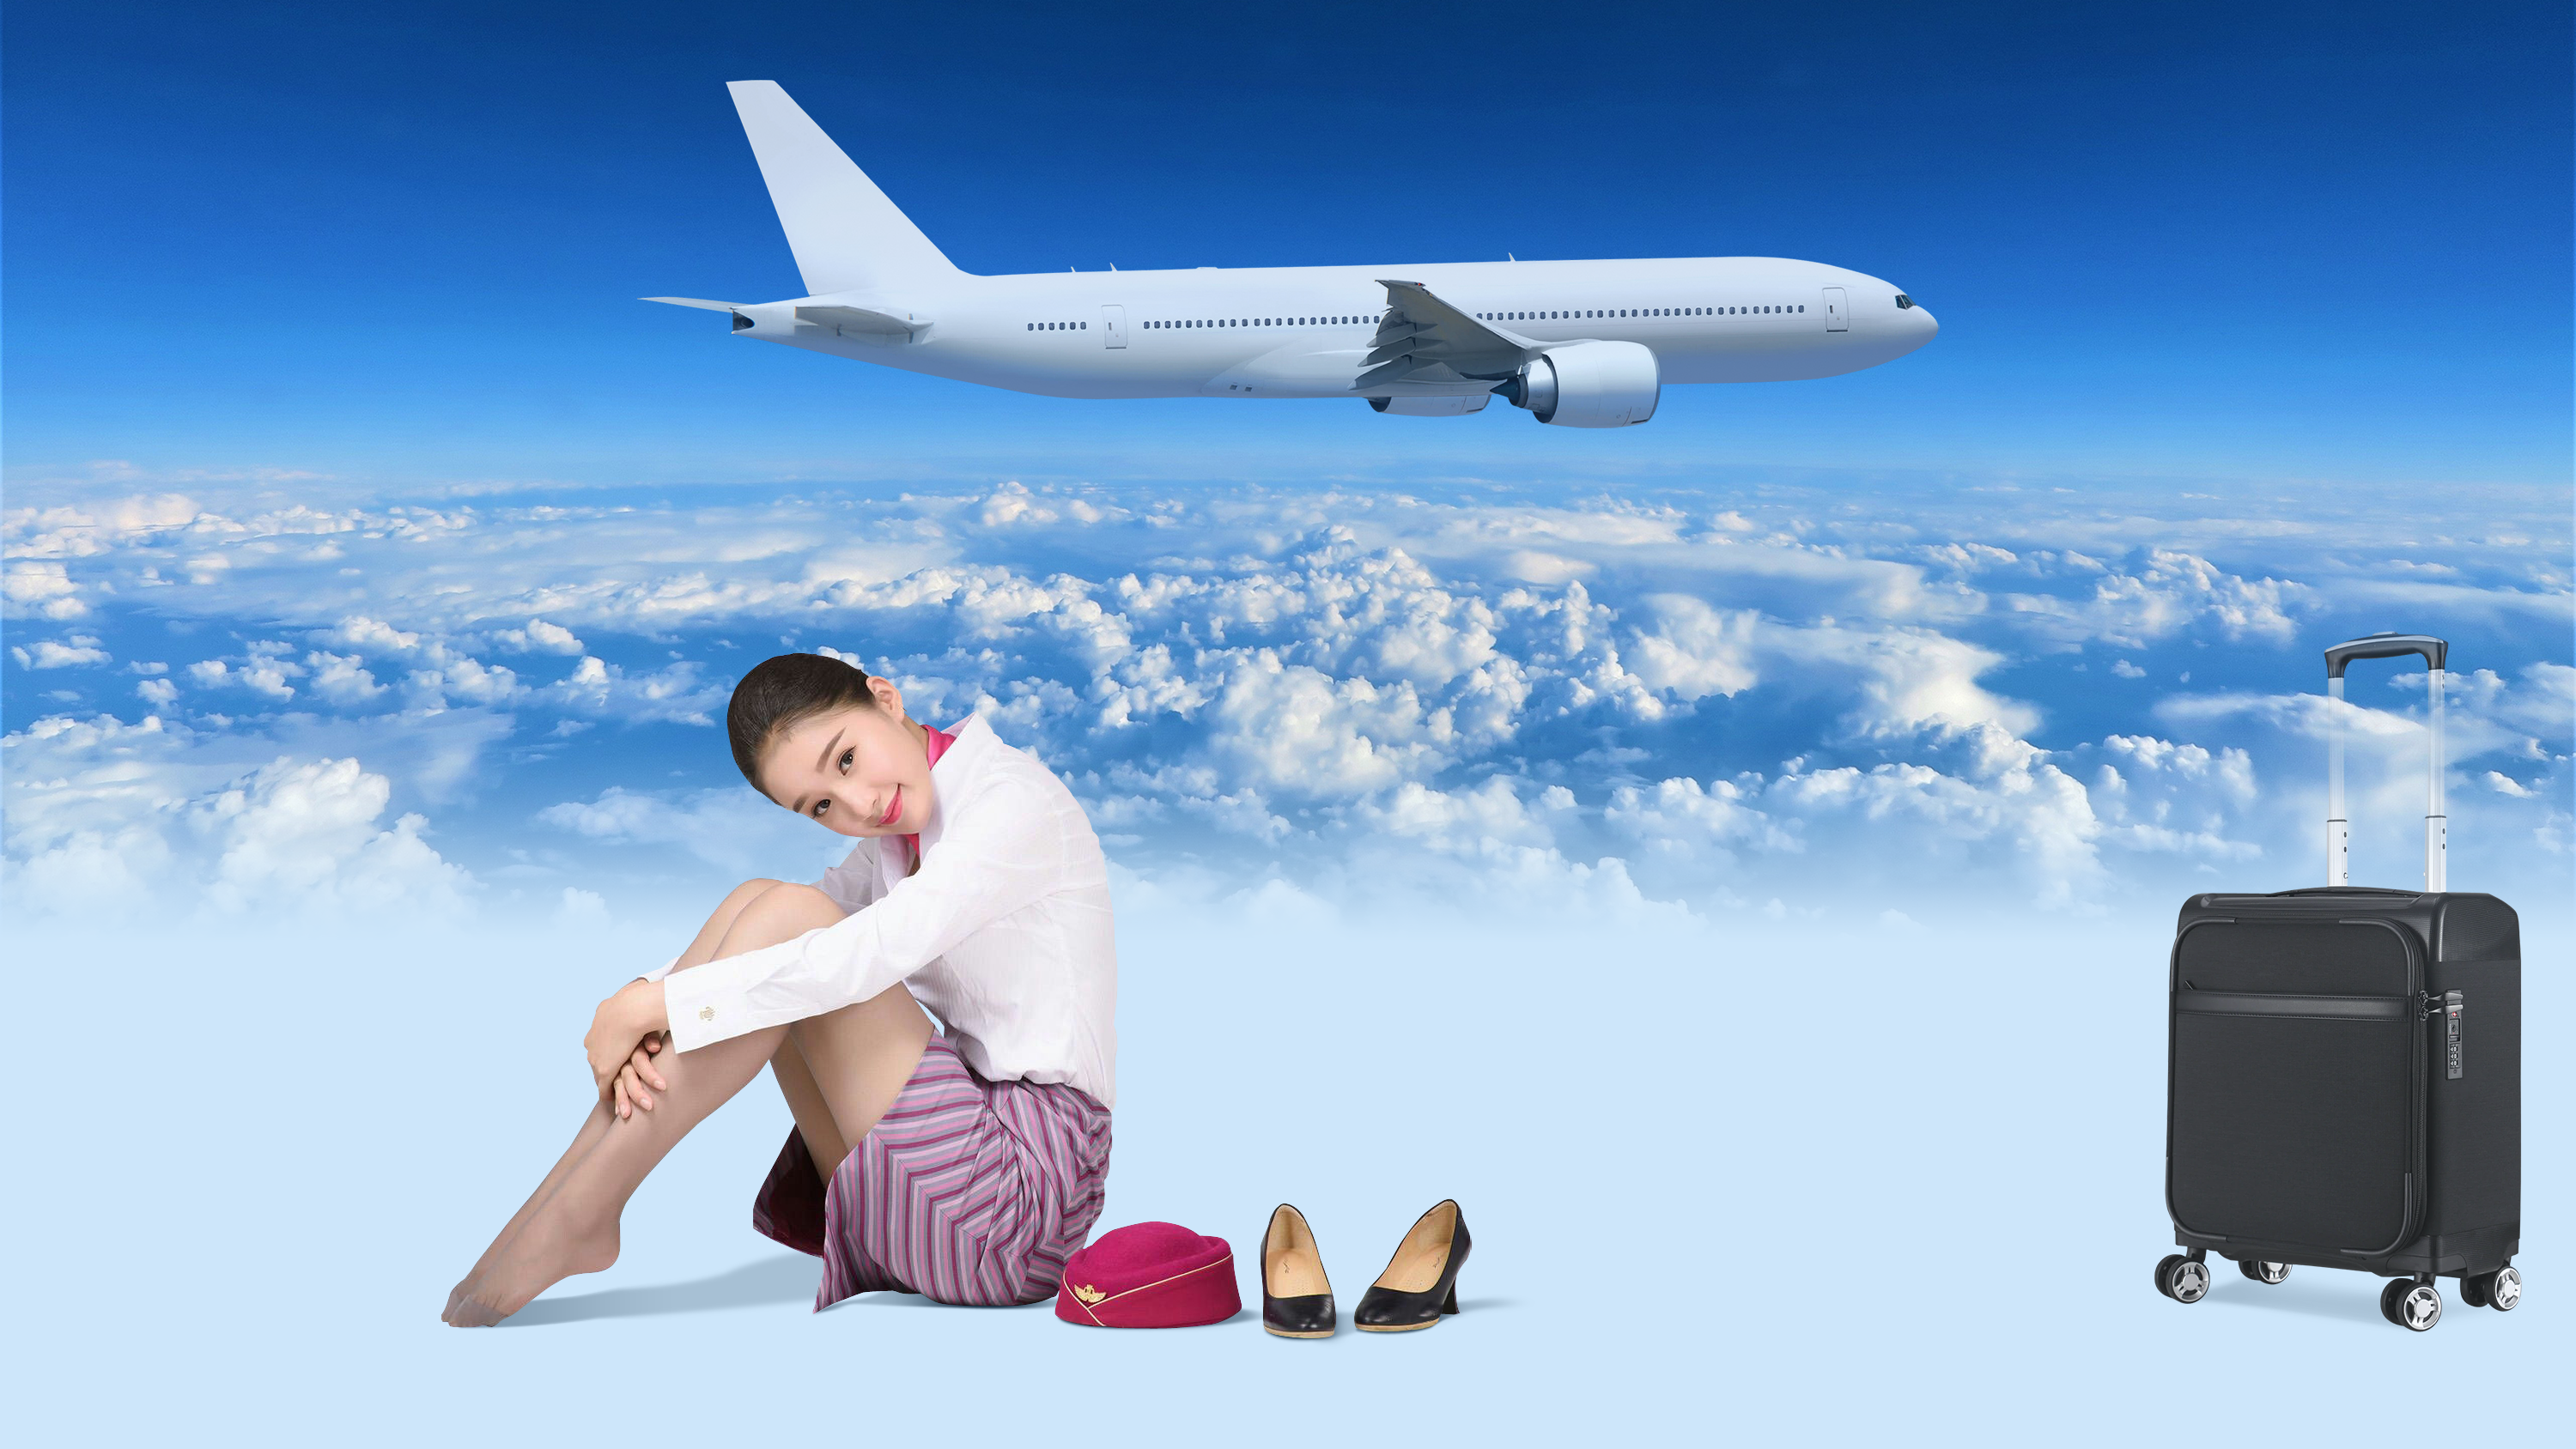 People 3000x1688 flight attendant reinforced toe airplane Asian pantyhose aircraft sky clouds looking at viewer smiling women